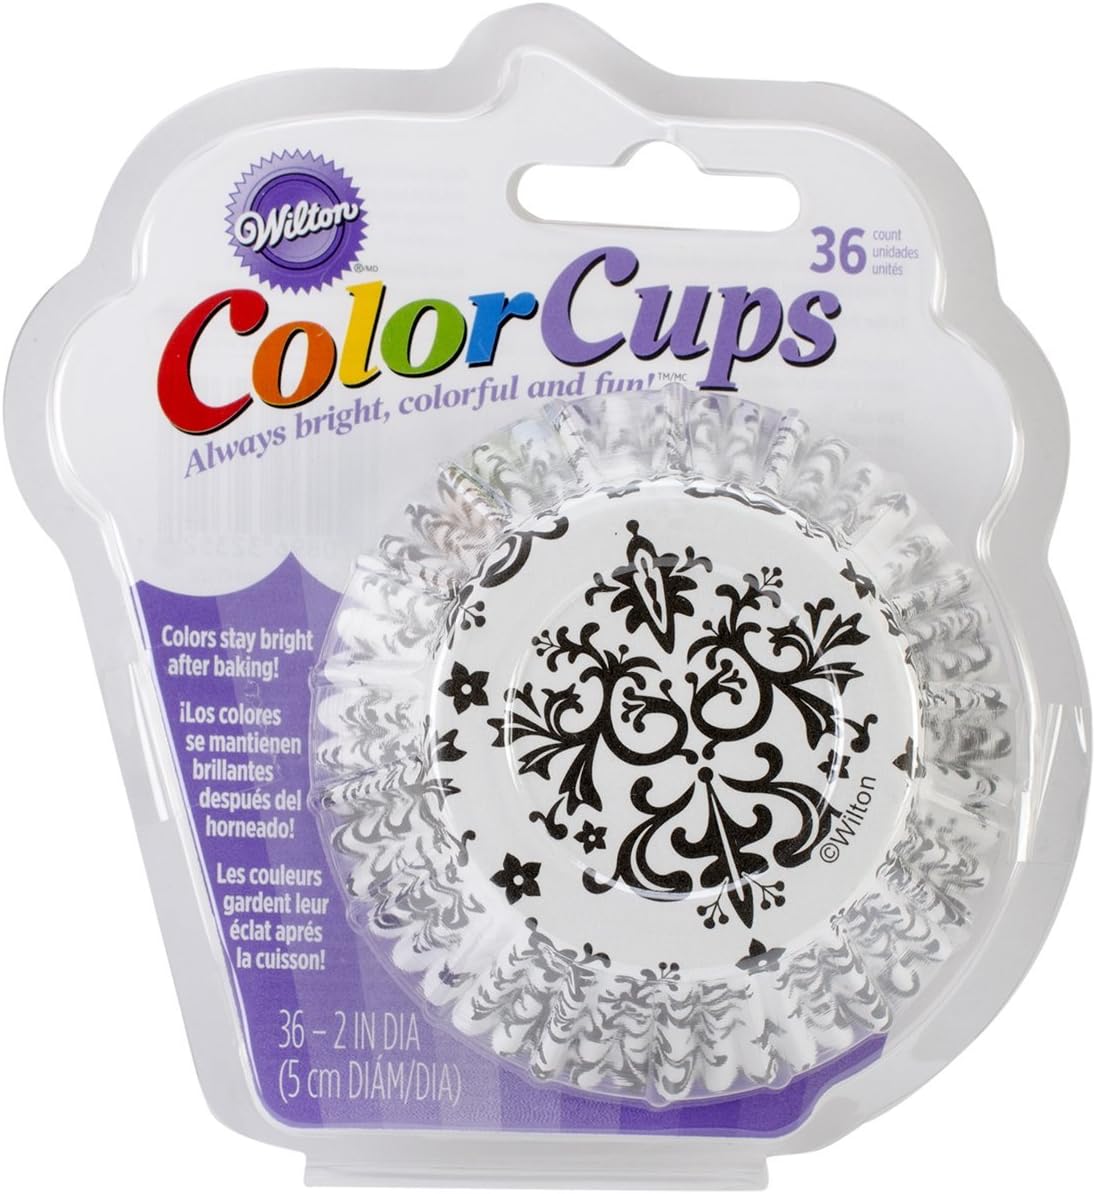 Black and White Damask Design Baking Cups, 36 count